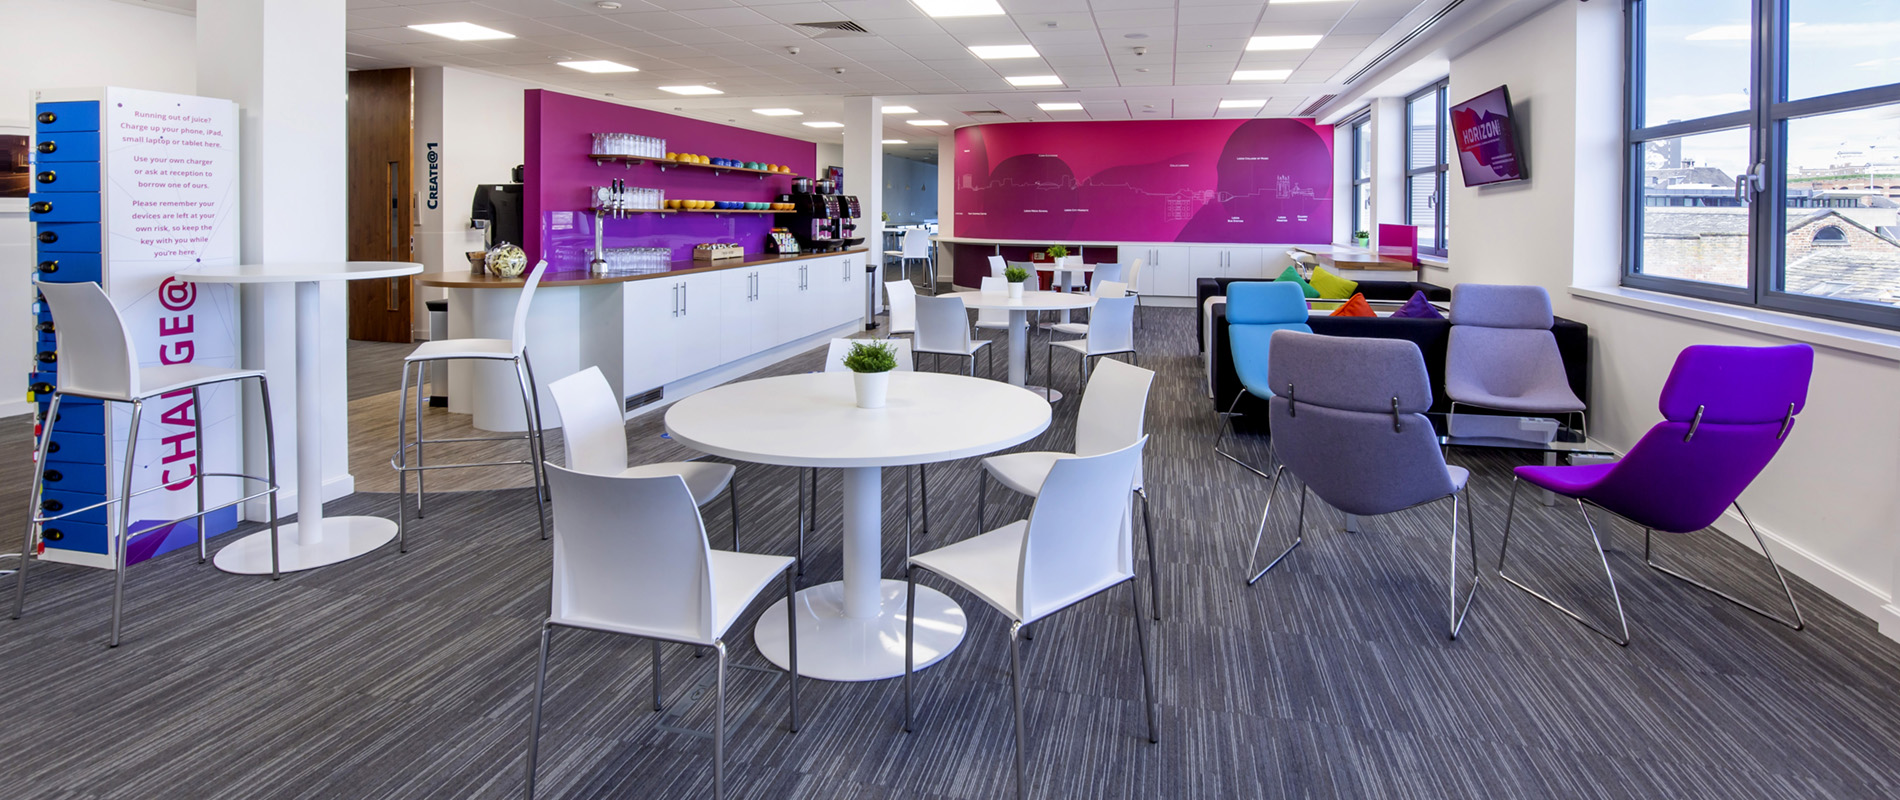 Horizon Leeds | meeting, event and conference rooms, central Leeds